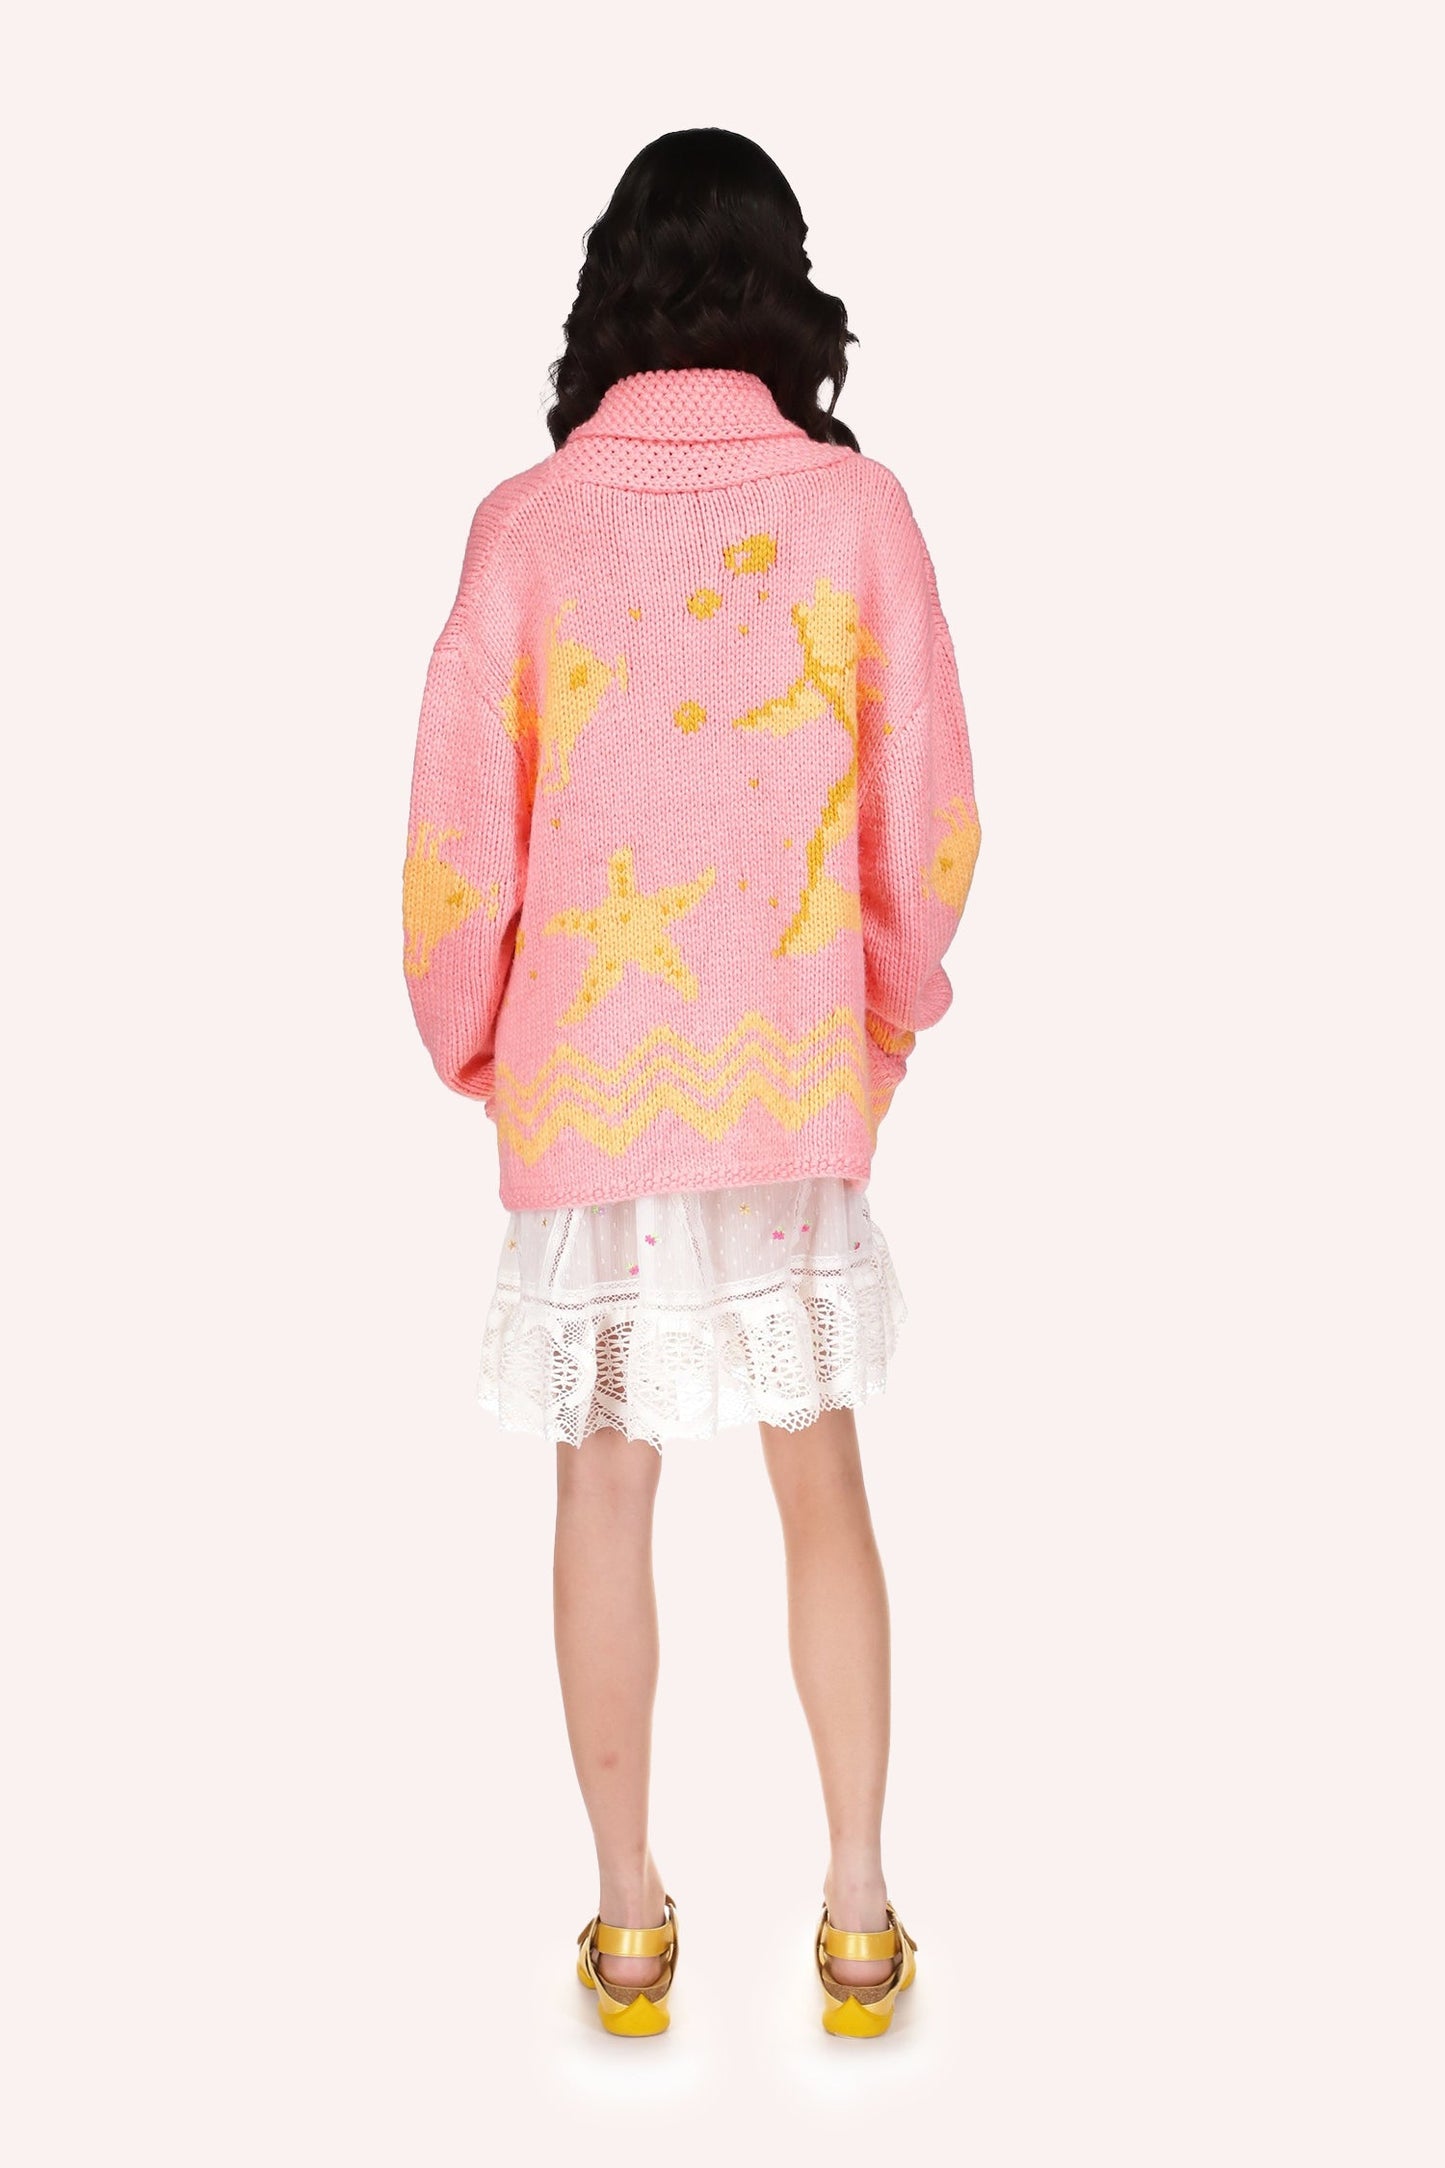 Hand Knit Cardigan, Powder Pink color with yellow fish, starfish, zigzag design at bottom